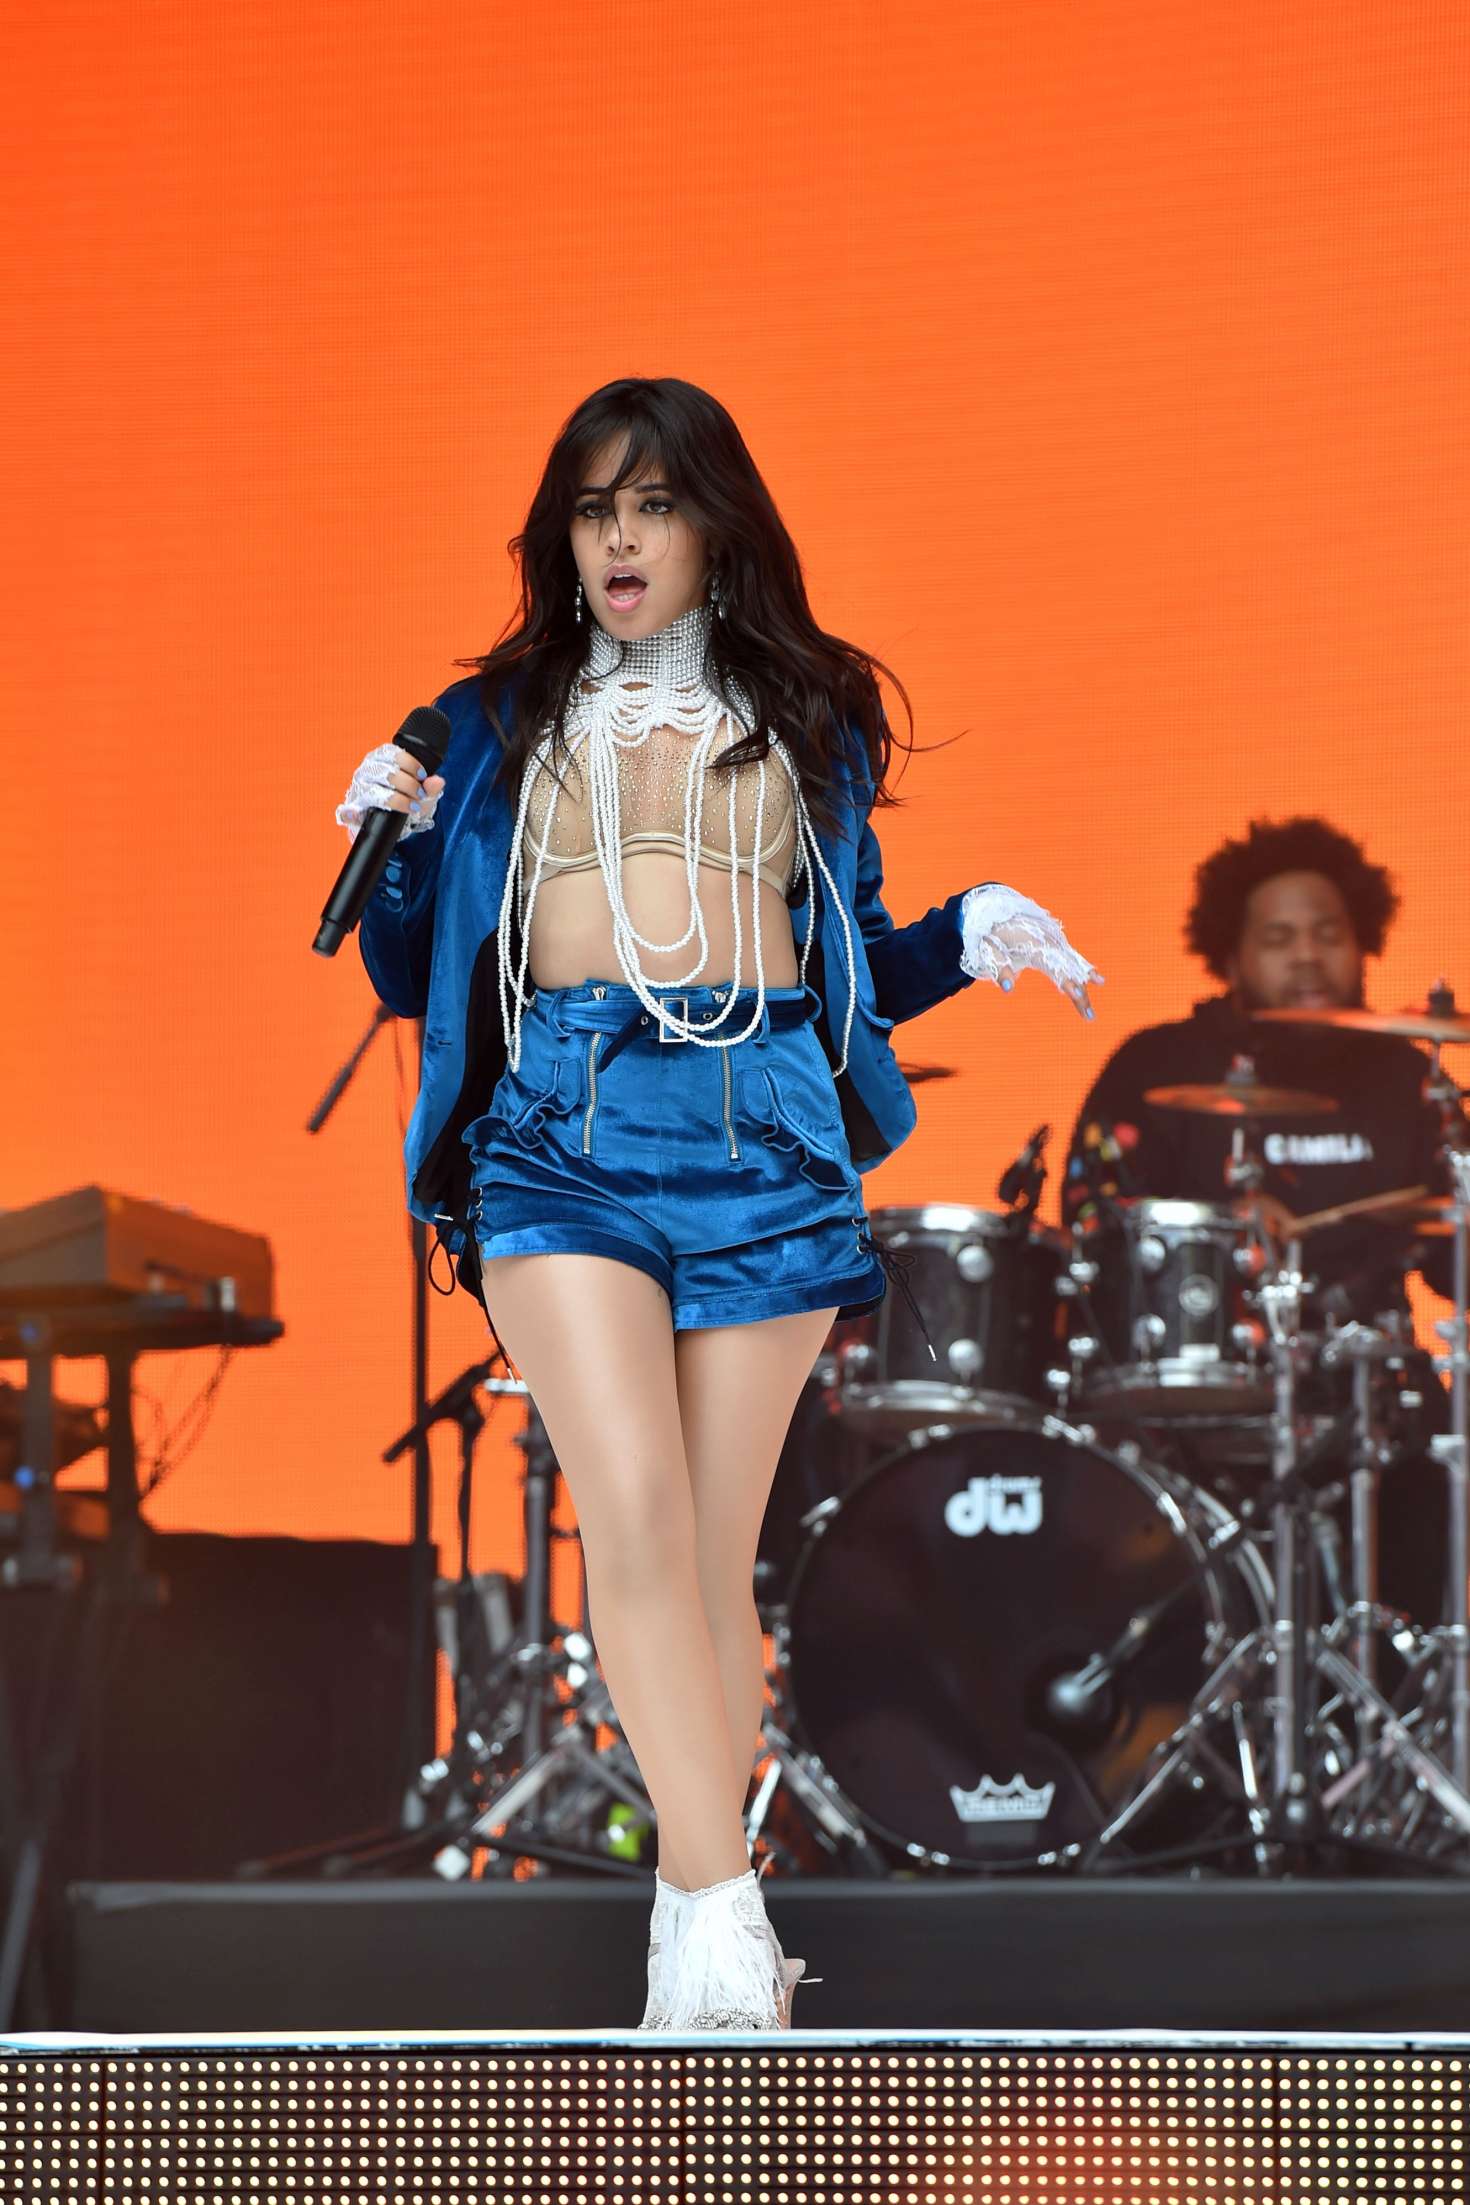 Camila Cabello â€“ Performing at Capitalâ€™s Summertime Ball in London